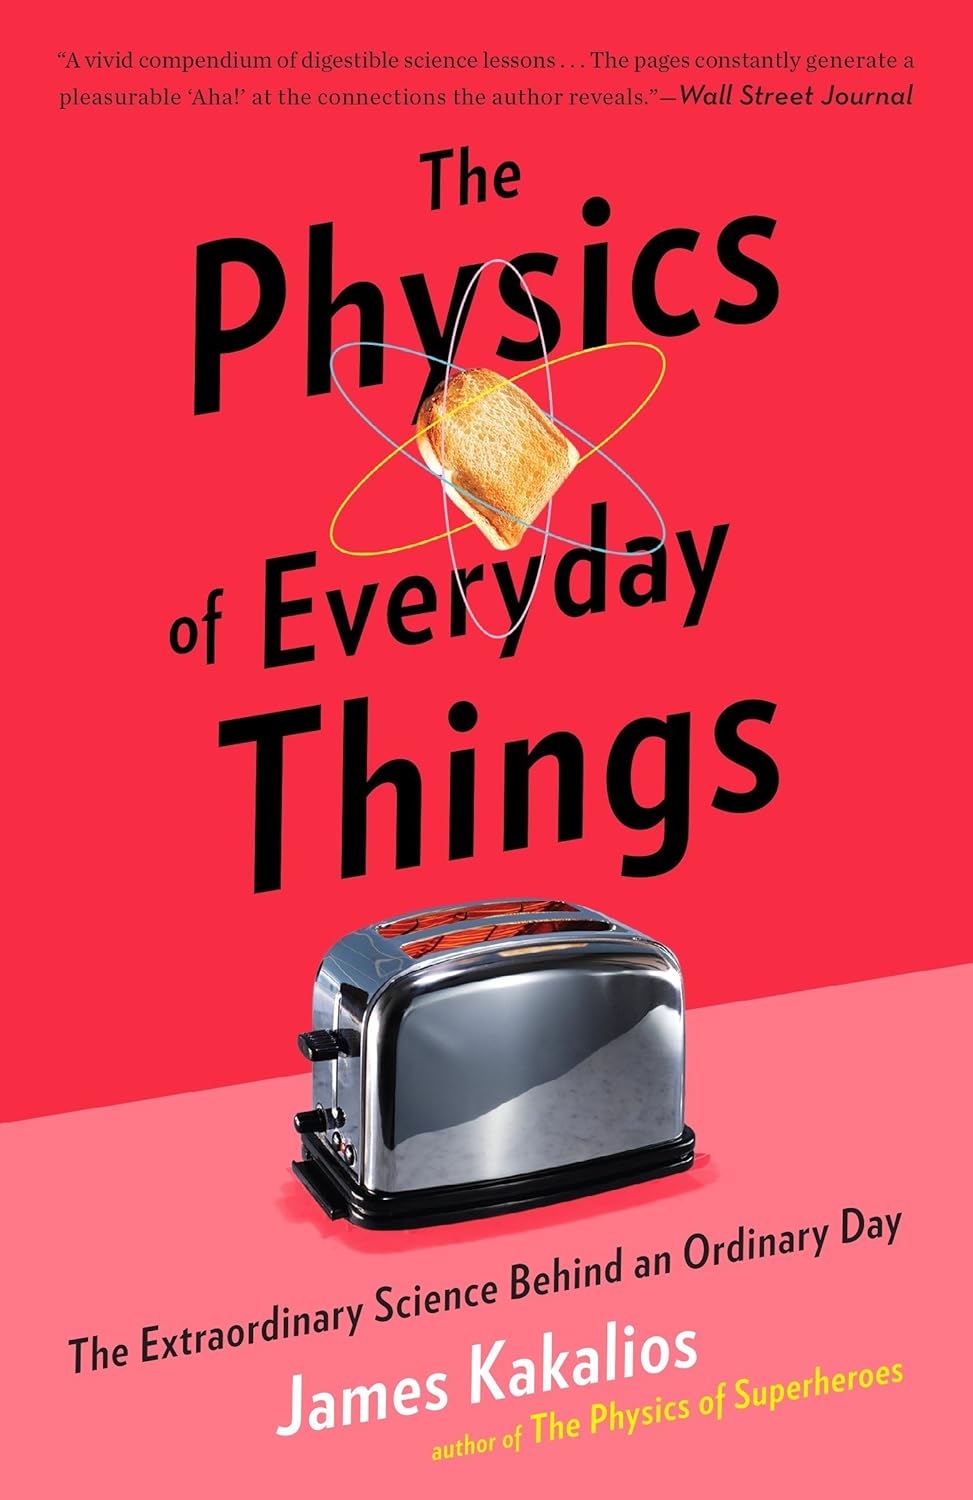 The Physics of Everyday Things: The Extraordinary Science Behind an Ordinary Day